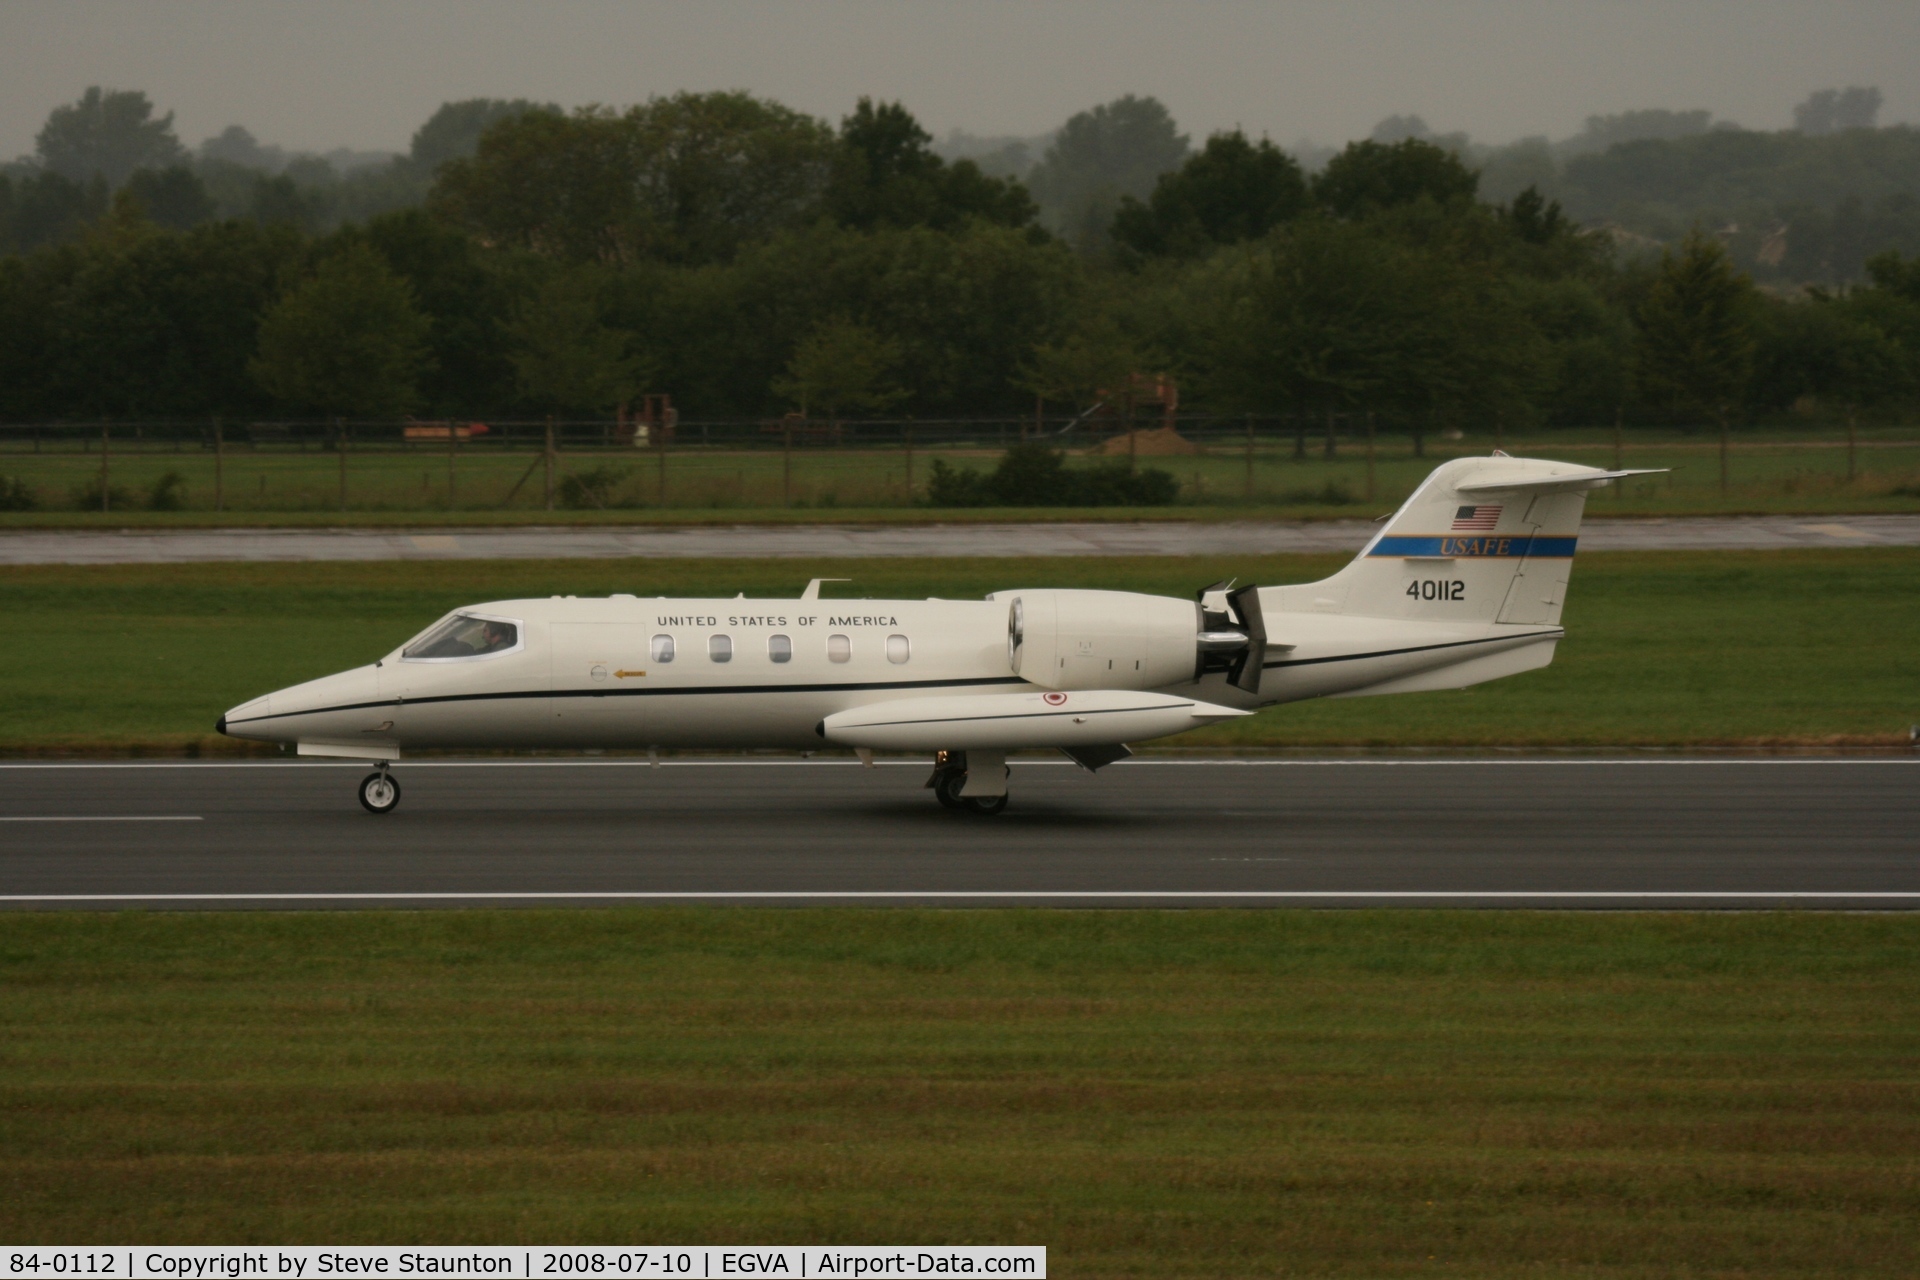 84-0112, 1994 Gates Learjet C-21A C/N 35A-558, Taken at the Royal International Air Tattoo 2008 during arrivals and departures (show days cancelled due to bad weather)